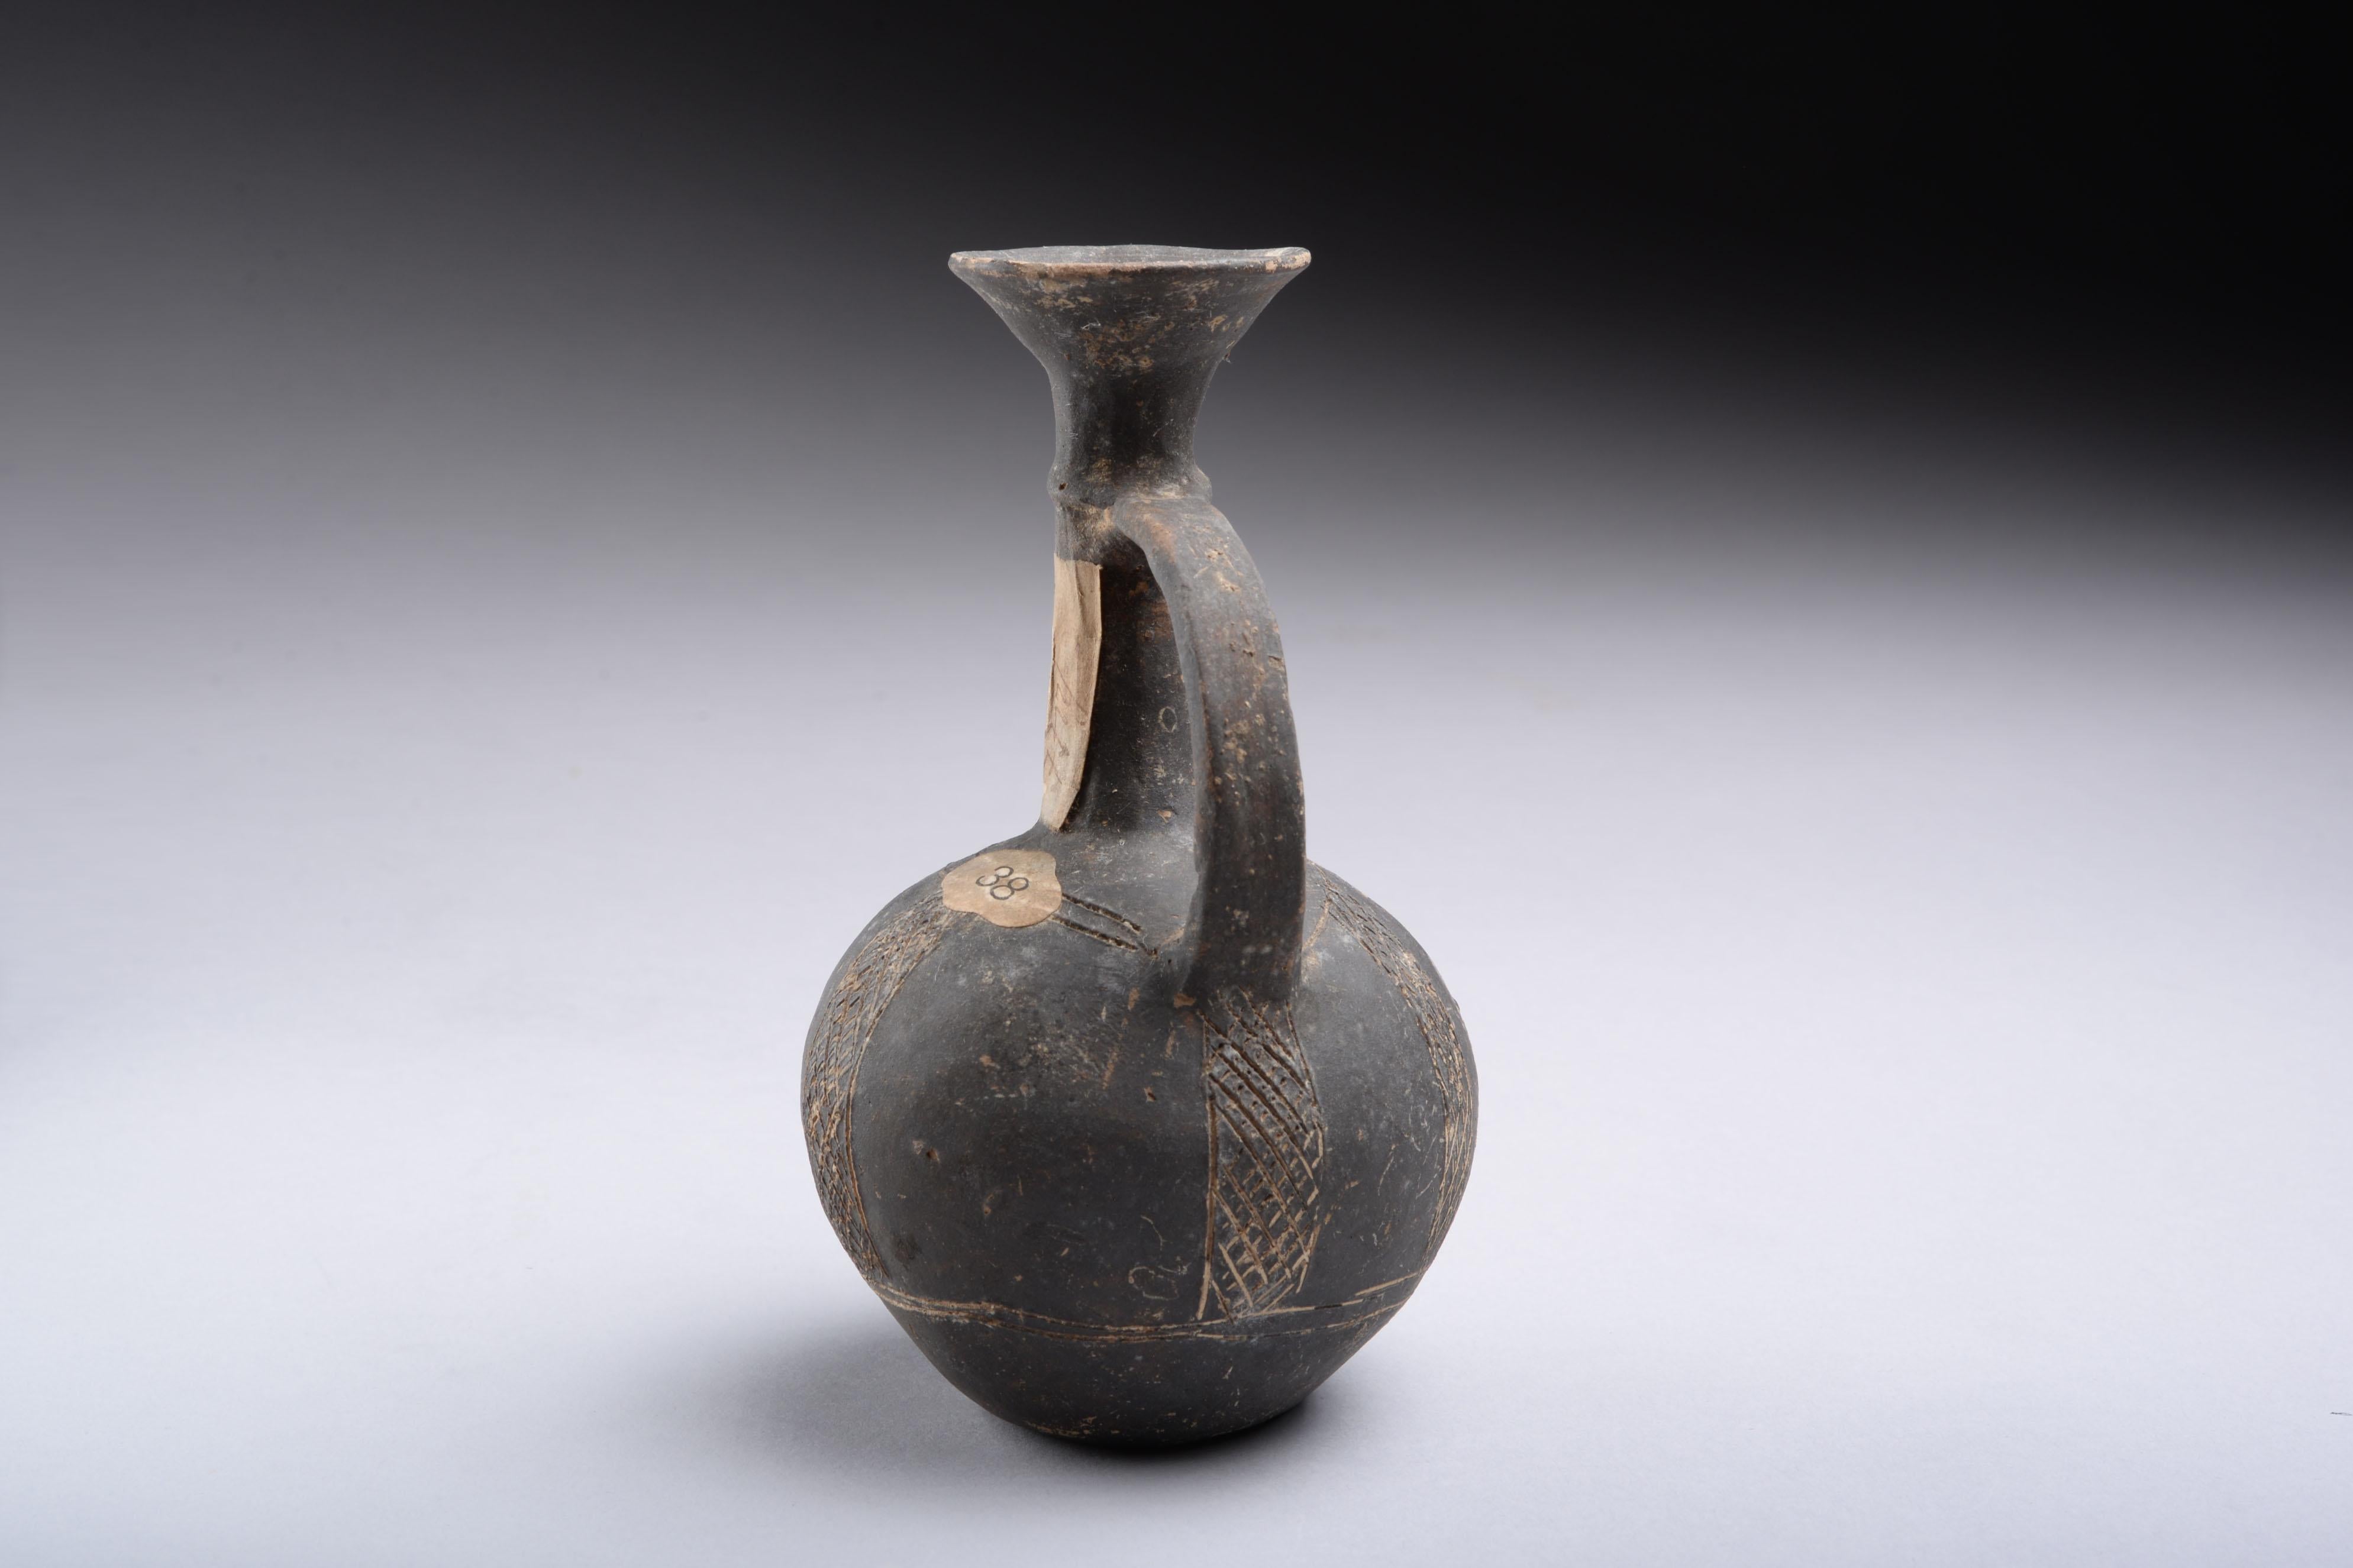 Exceptional Ancient Cypriot Bronze Age Jug 1